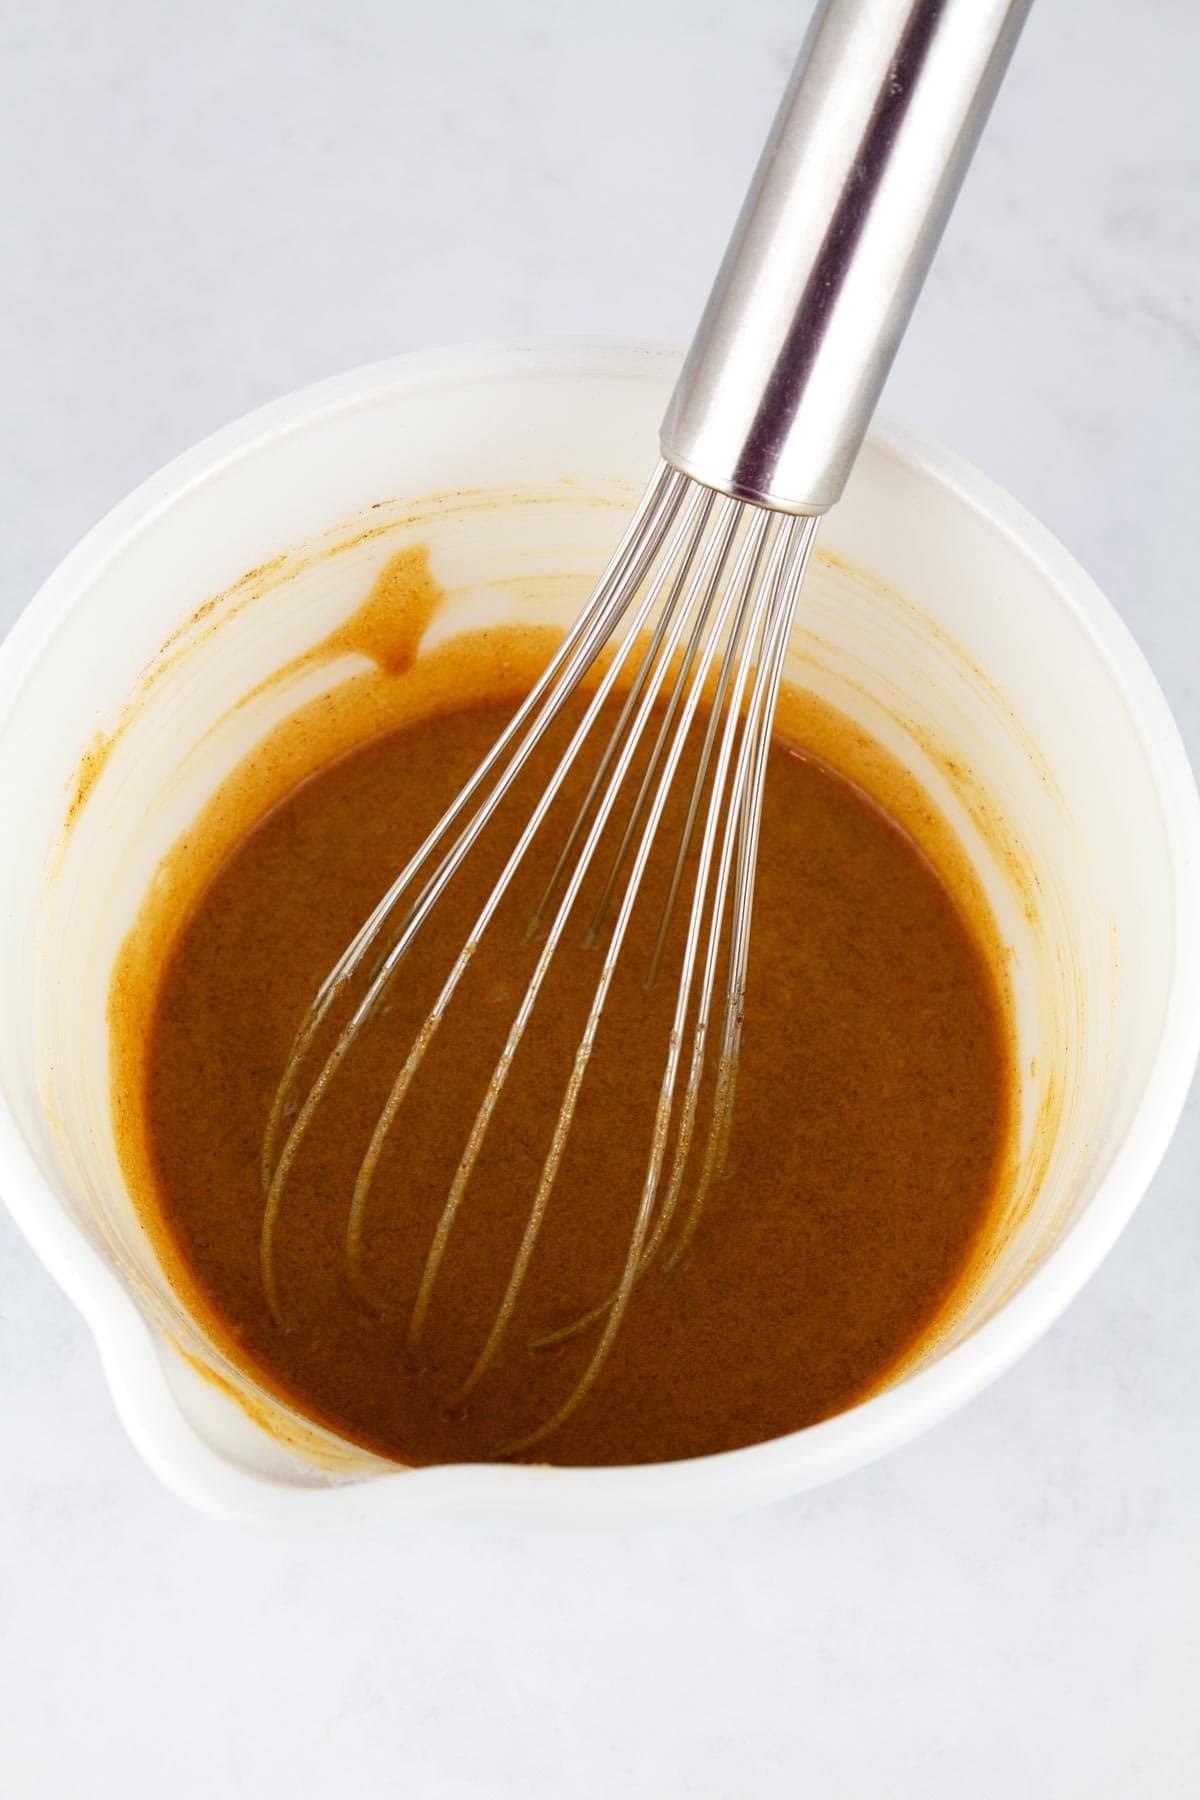 Cinnamon sugar sauce made with brown sugar and butterscotch pudding mixed in a bowl.